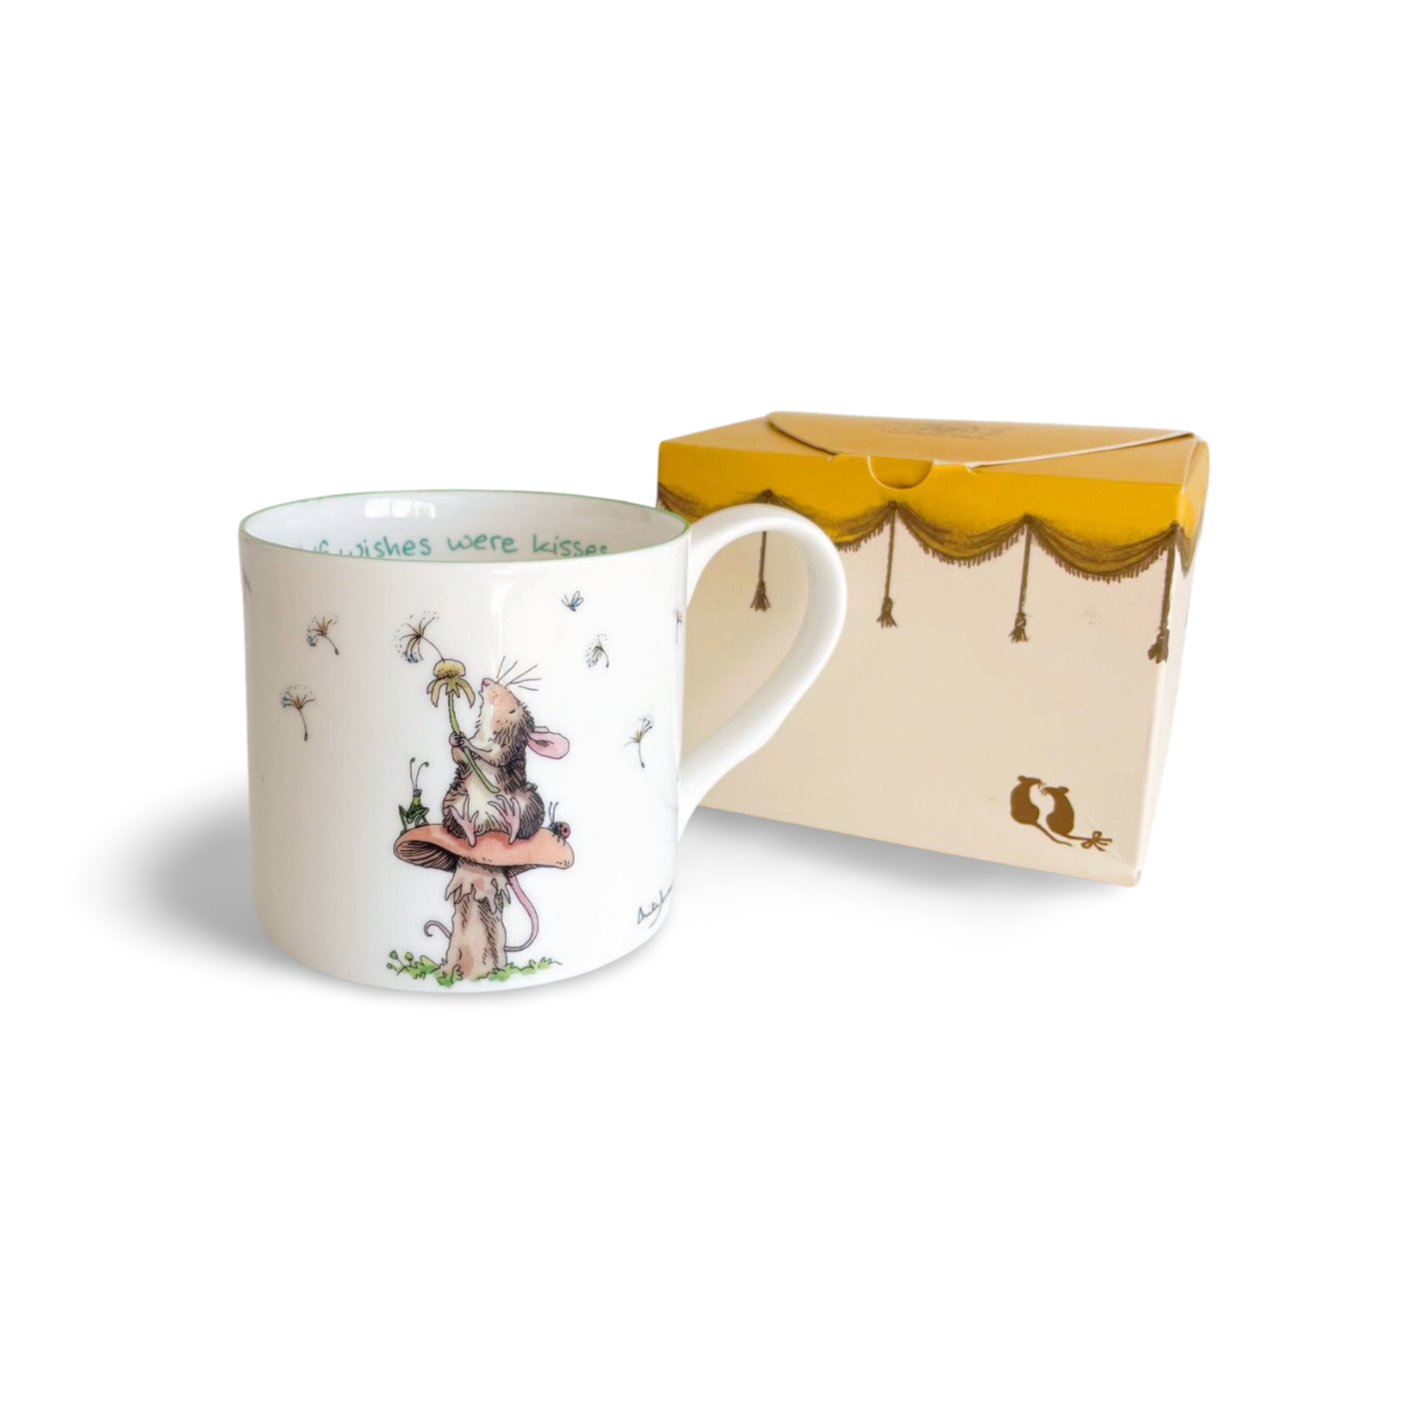 Two Bad Mice - If Wishes were Kisses Mug